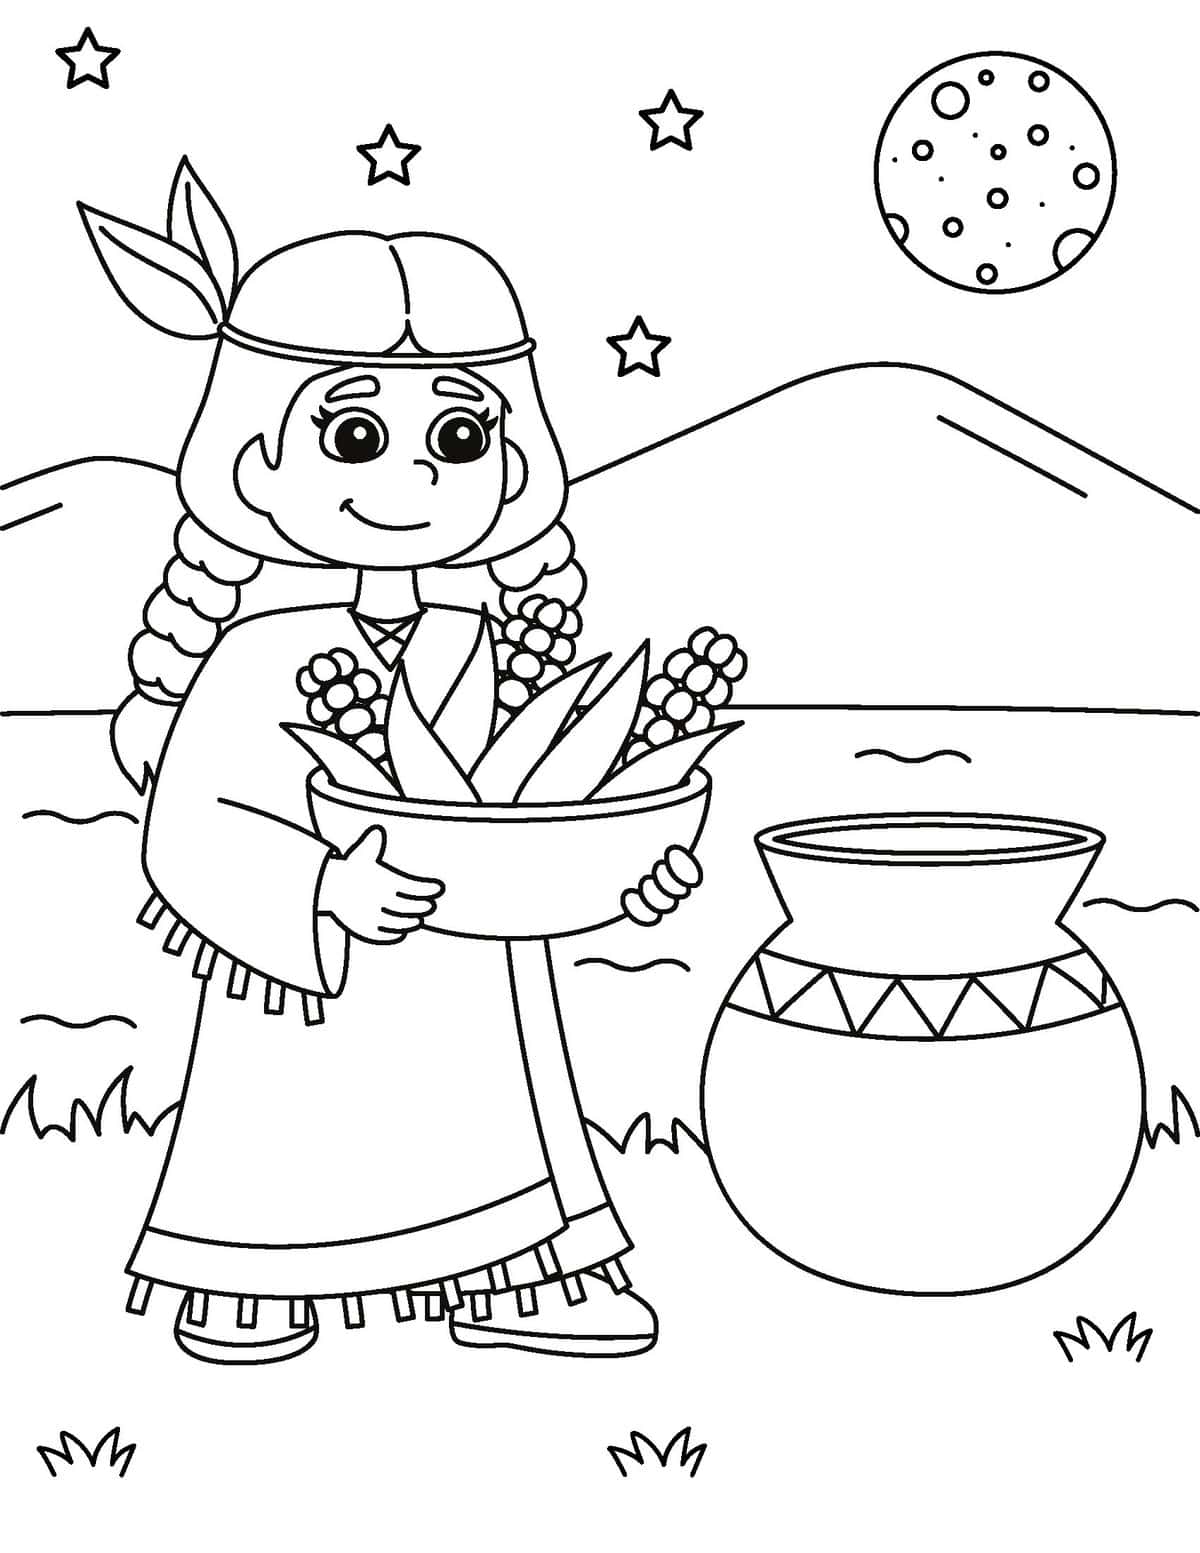 Free thanksgiving coloring pages for kids and adults